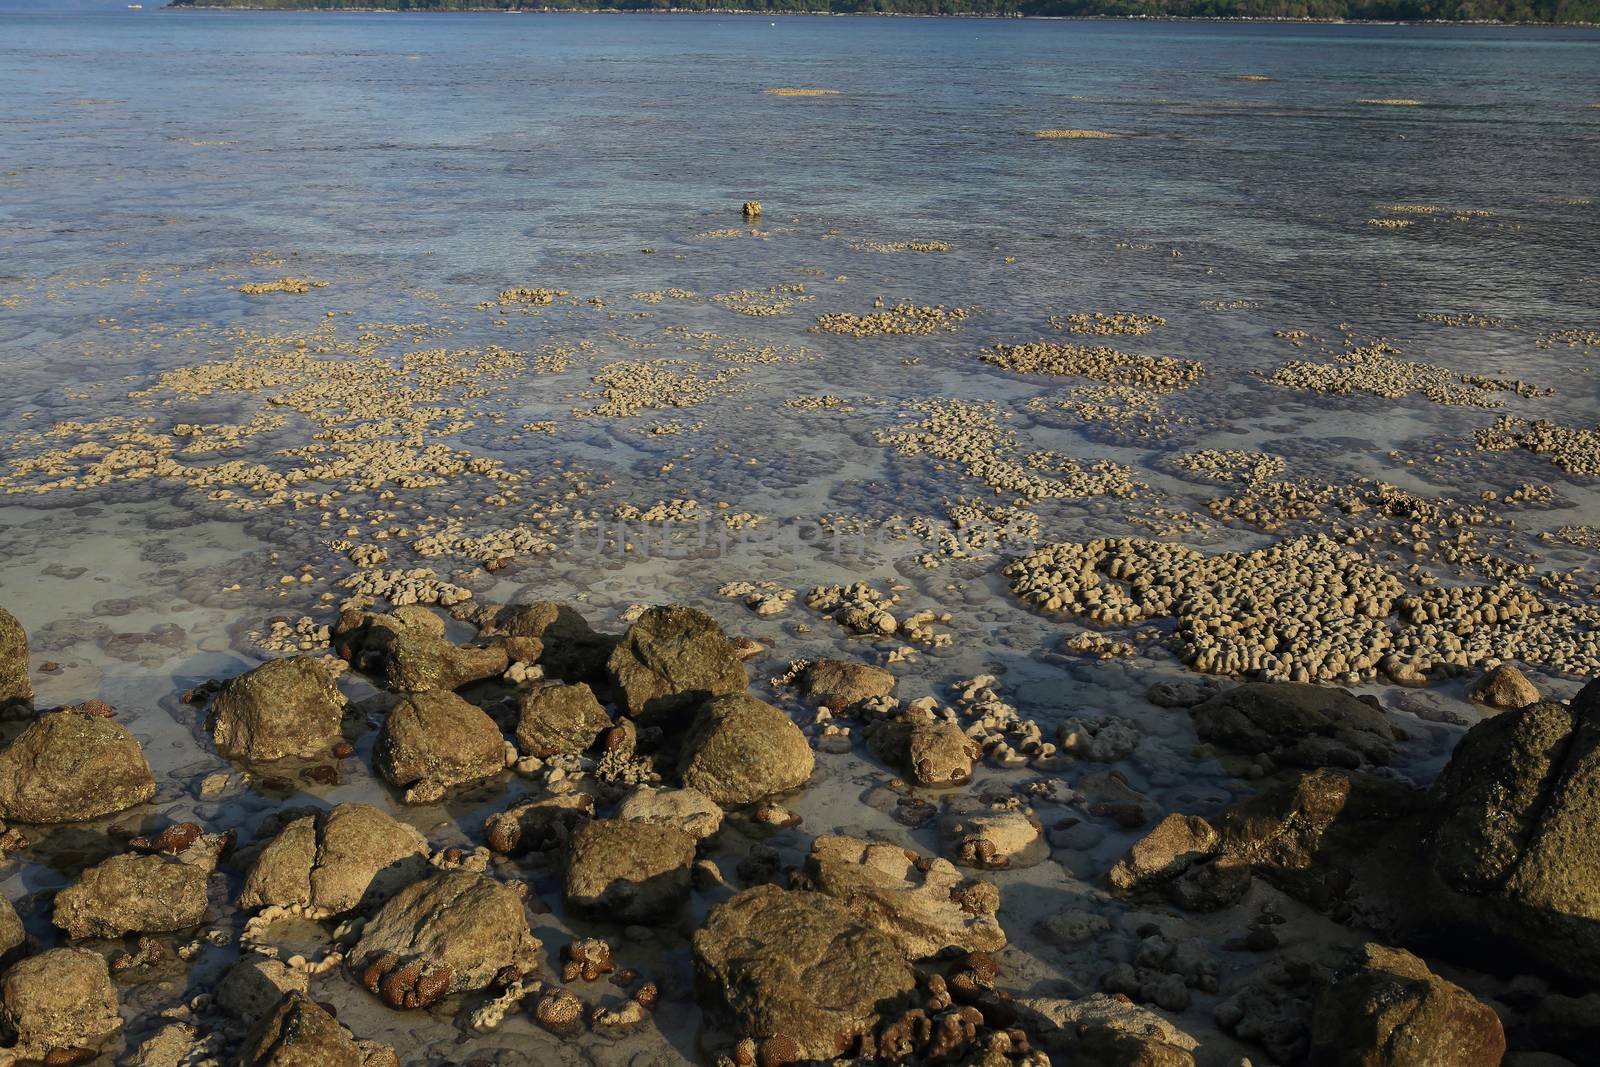 Corals in shallow waters during low tide by rufous